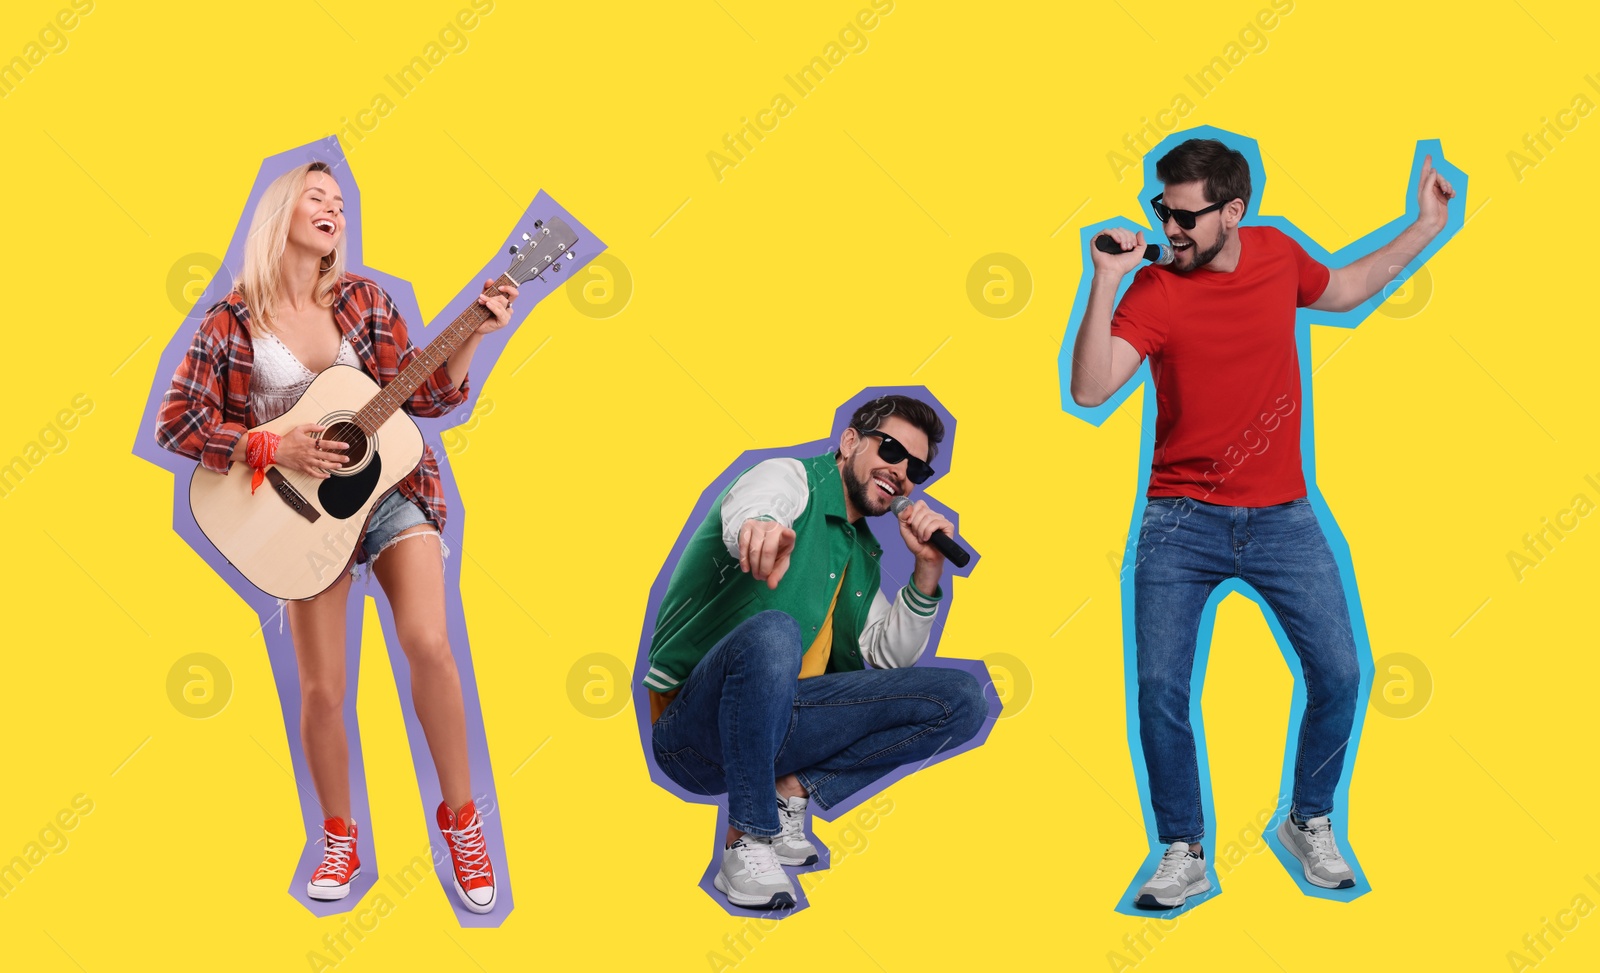 Image of Pop art poster. People singing and playing guitar on yellow background. Banner design